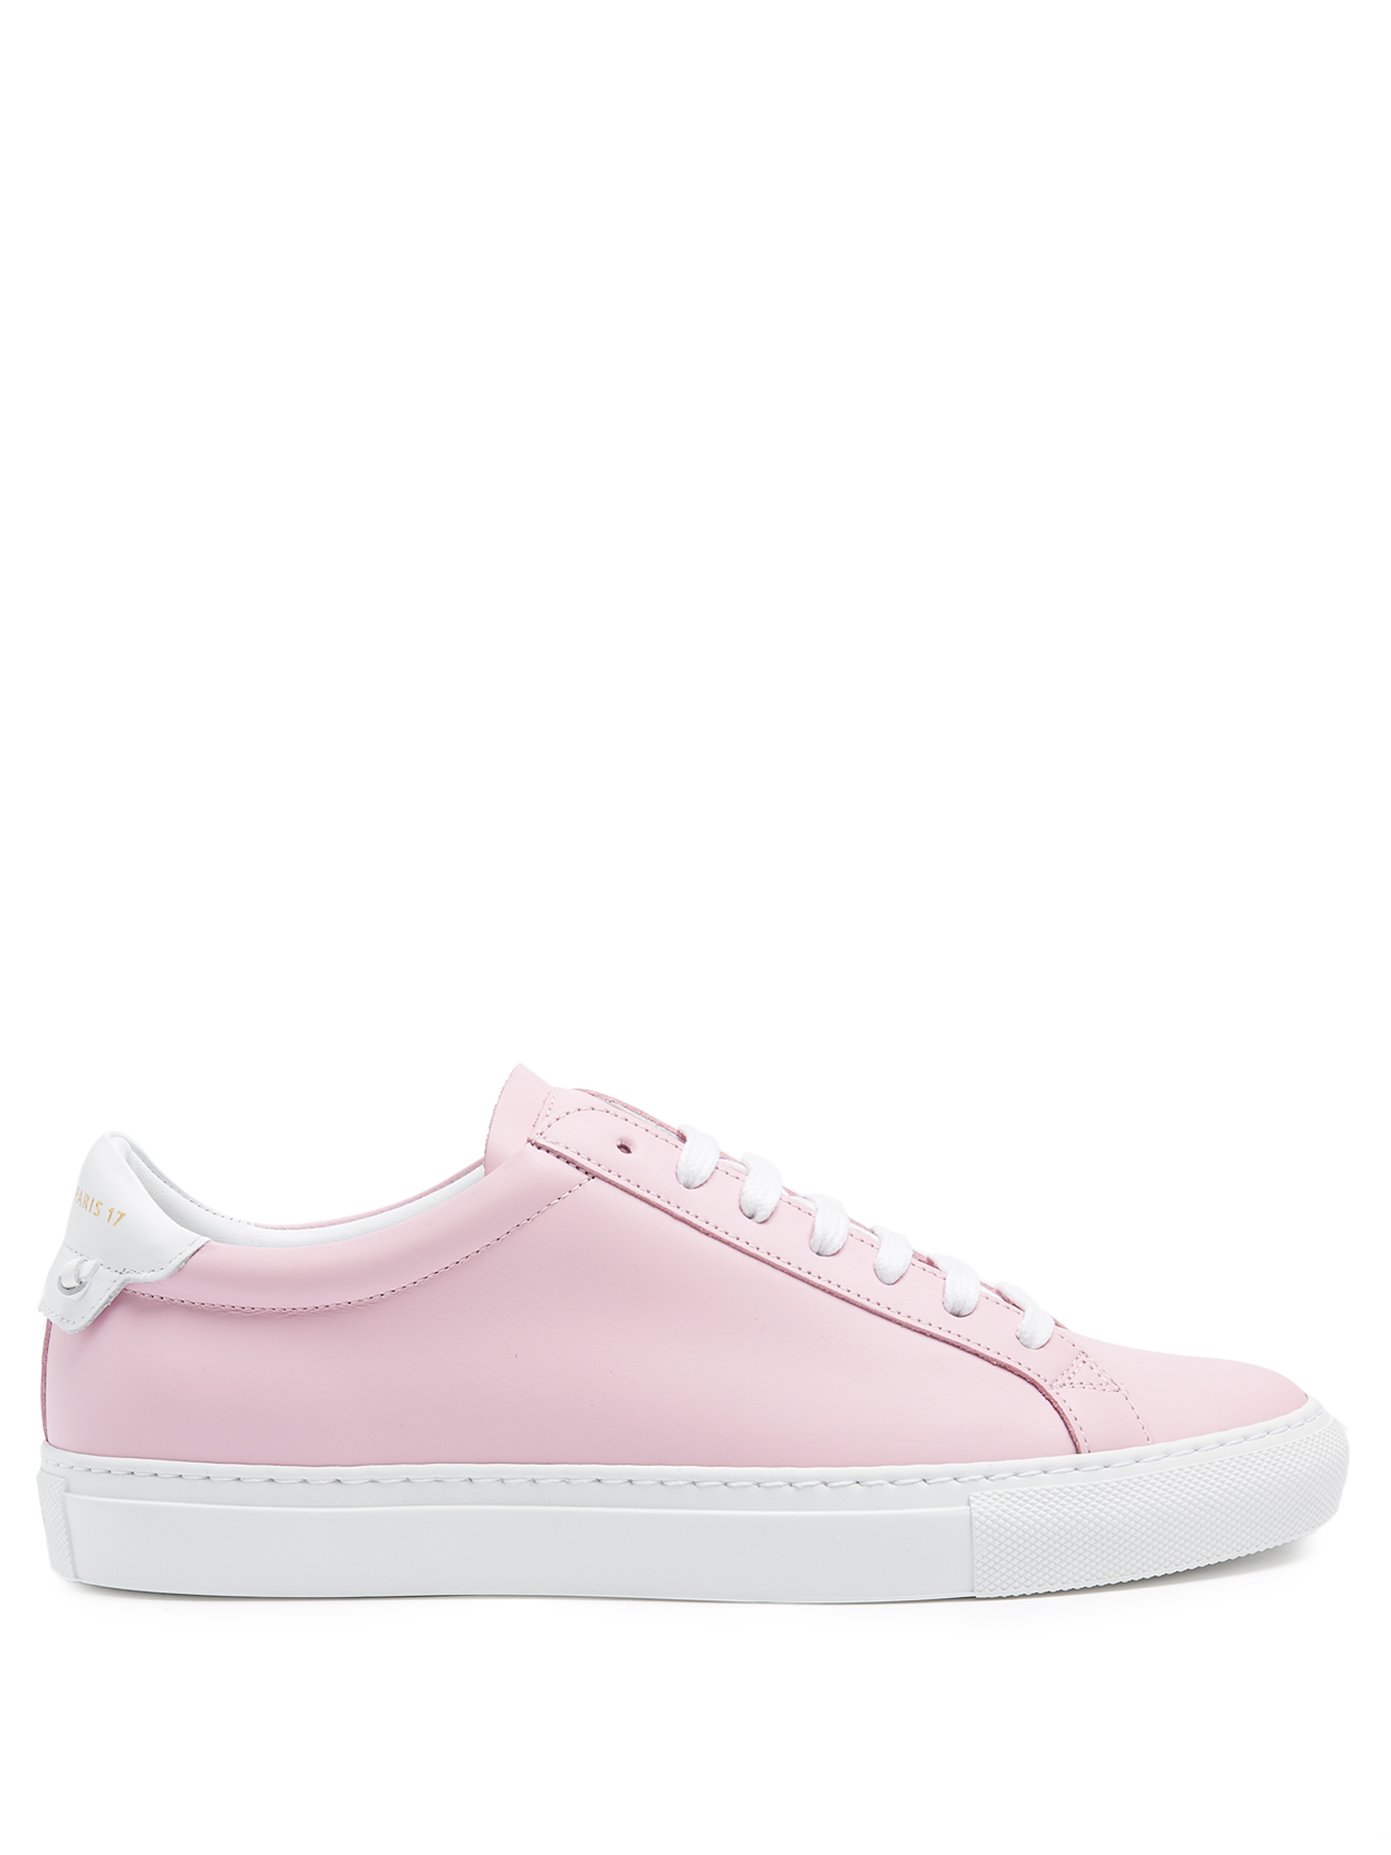 Urban Street low-top leather trainers 